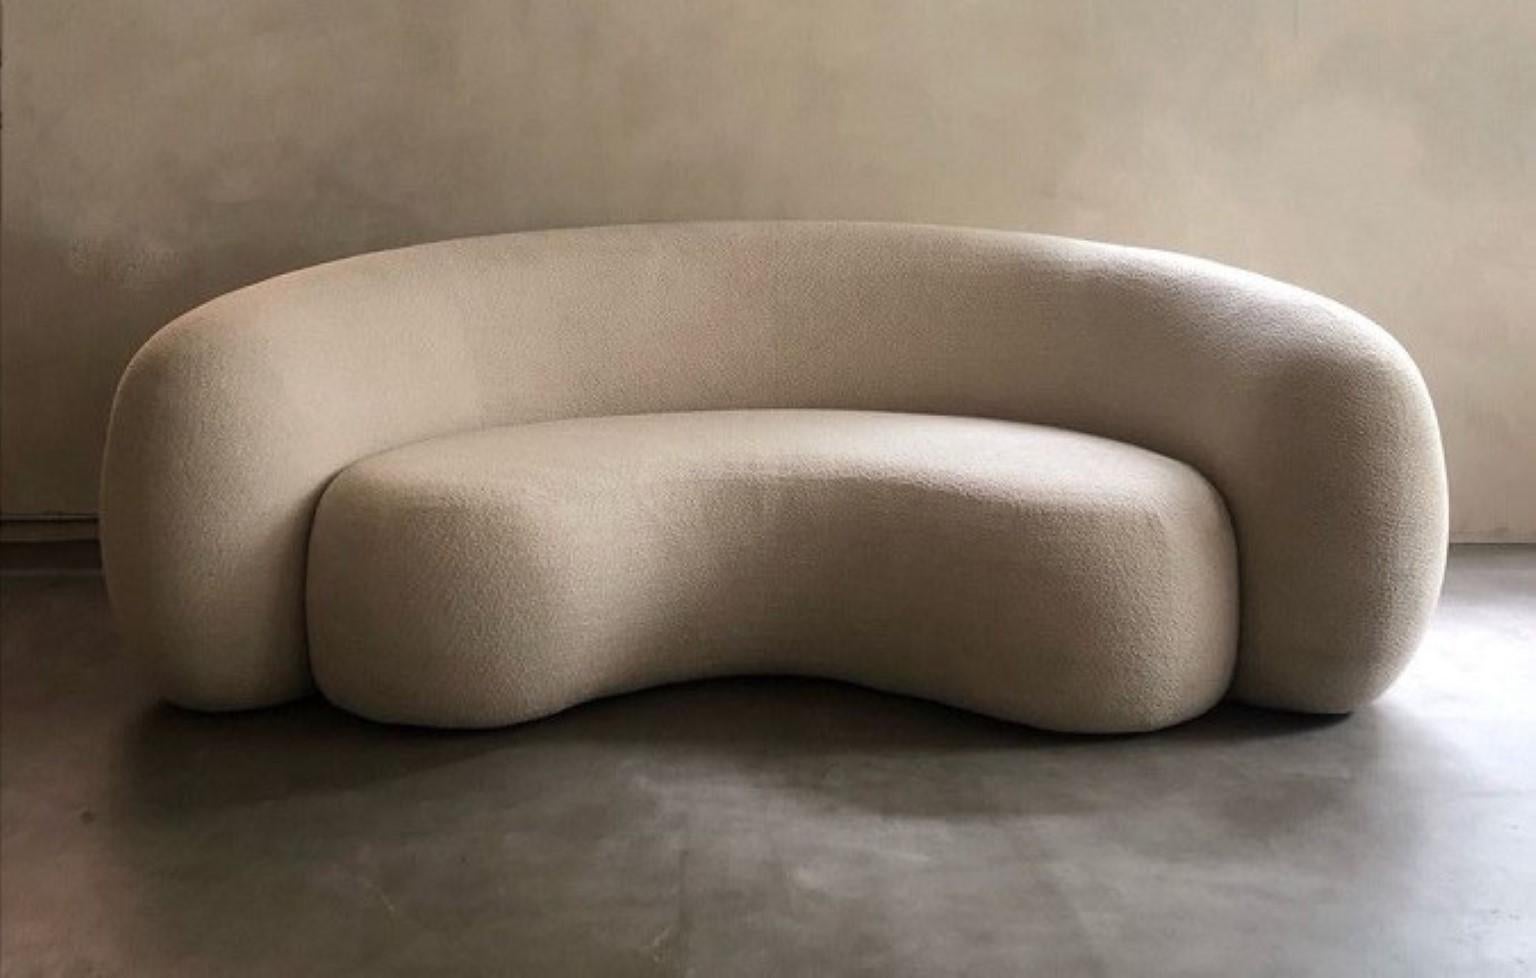 Circular sofa by kar
Dimensions: W 240 x D 133 x H 80 cm
Materials: Fabric, MDF frame


Kar, is the root of Sanskrit Karma, meaning karmic repetition. We seek the cause and effect in aesthetics, inspired from the past, the present, and the future,